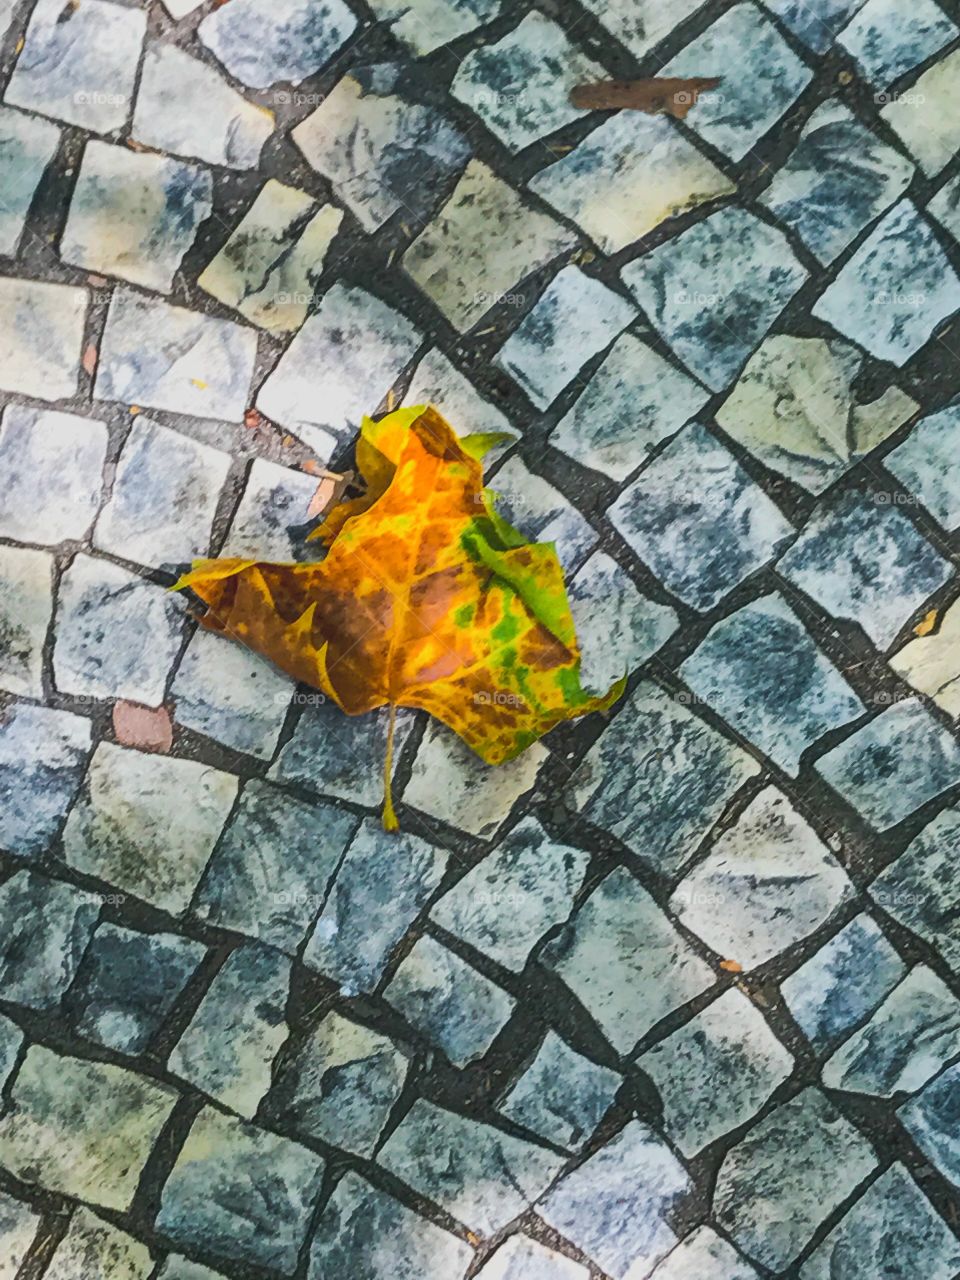 Leaf on stone walkway - In Contrast Mission